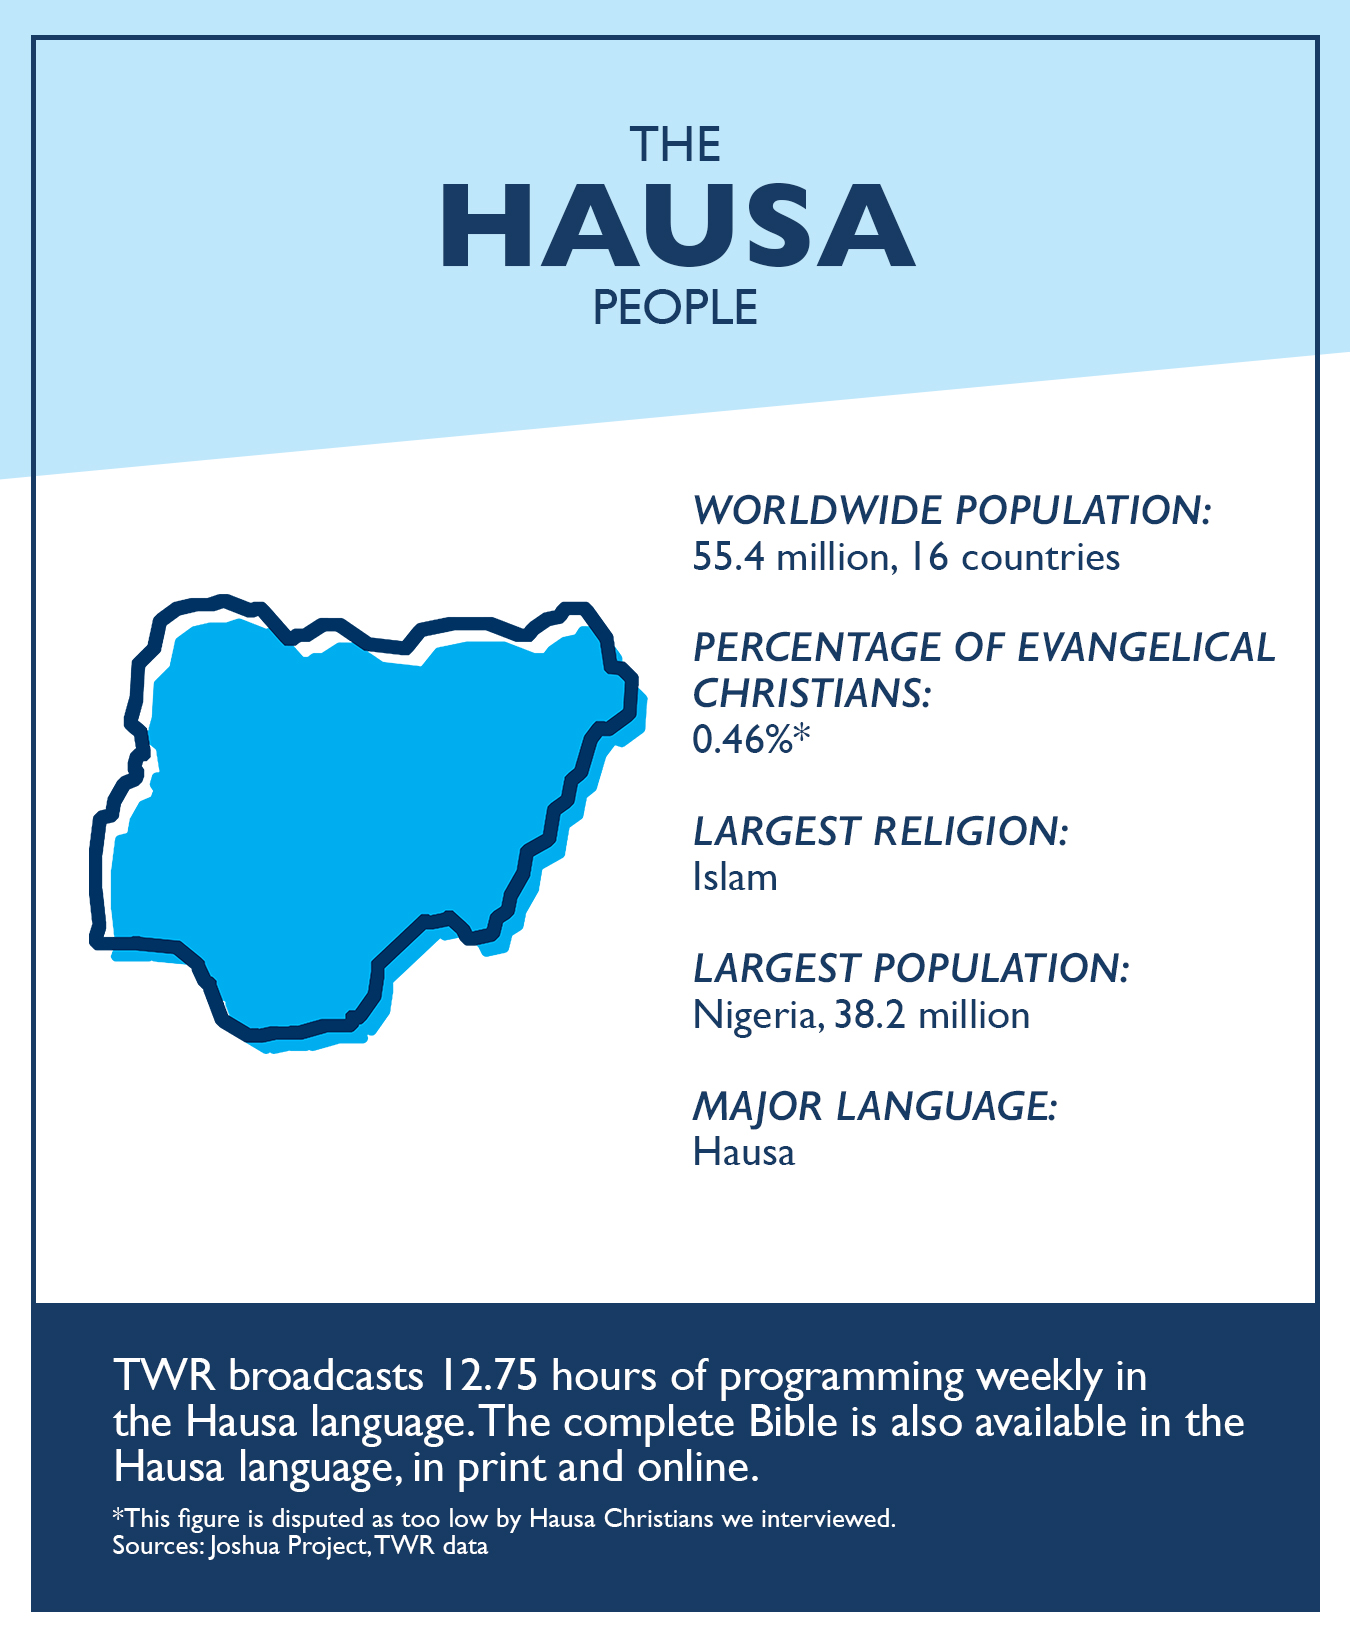 Statistics gathered through Joshua Project and TWR